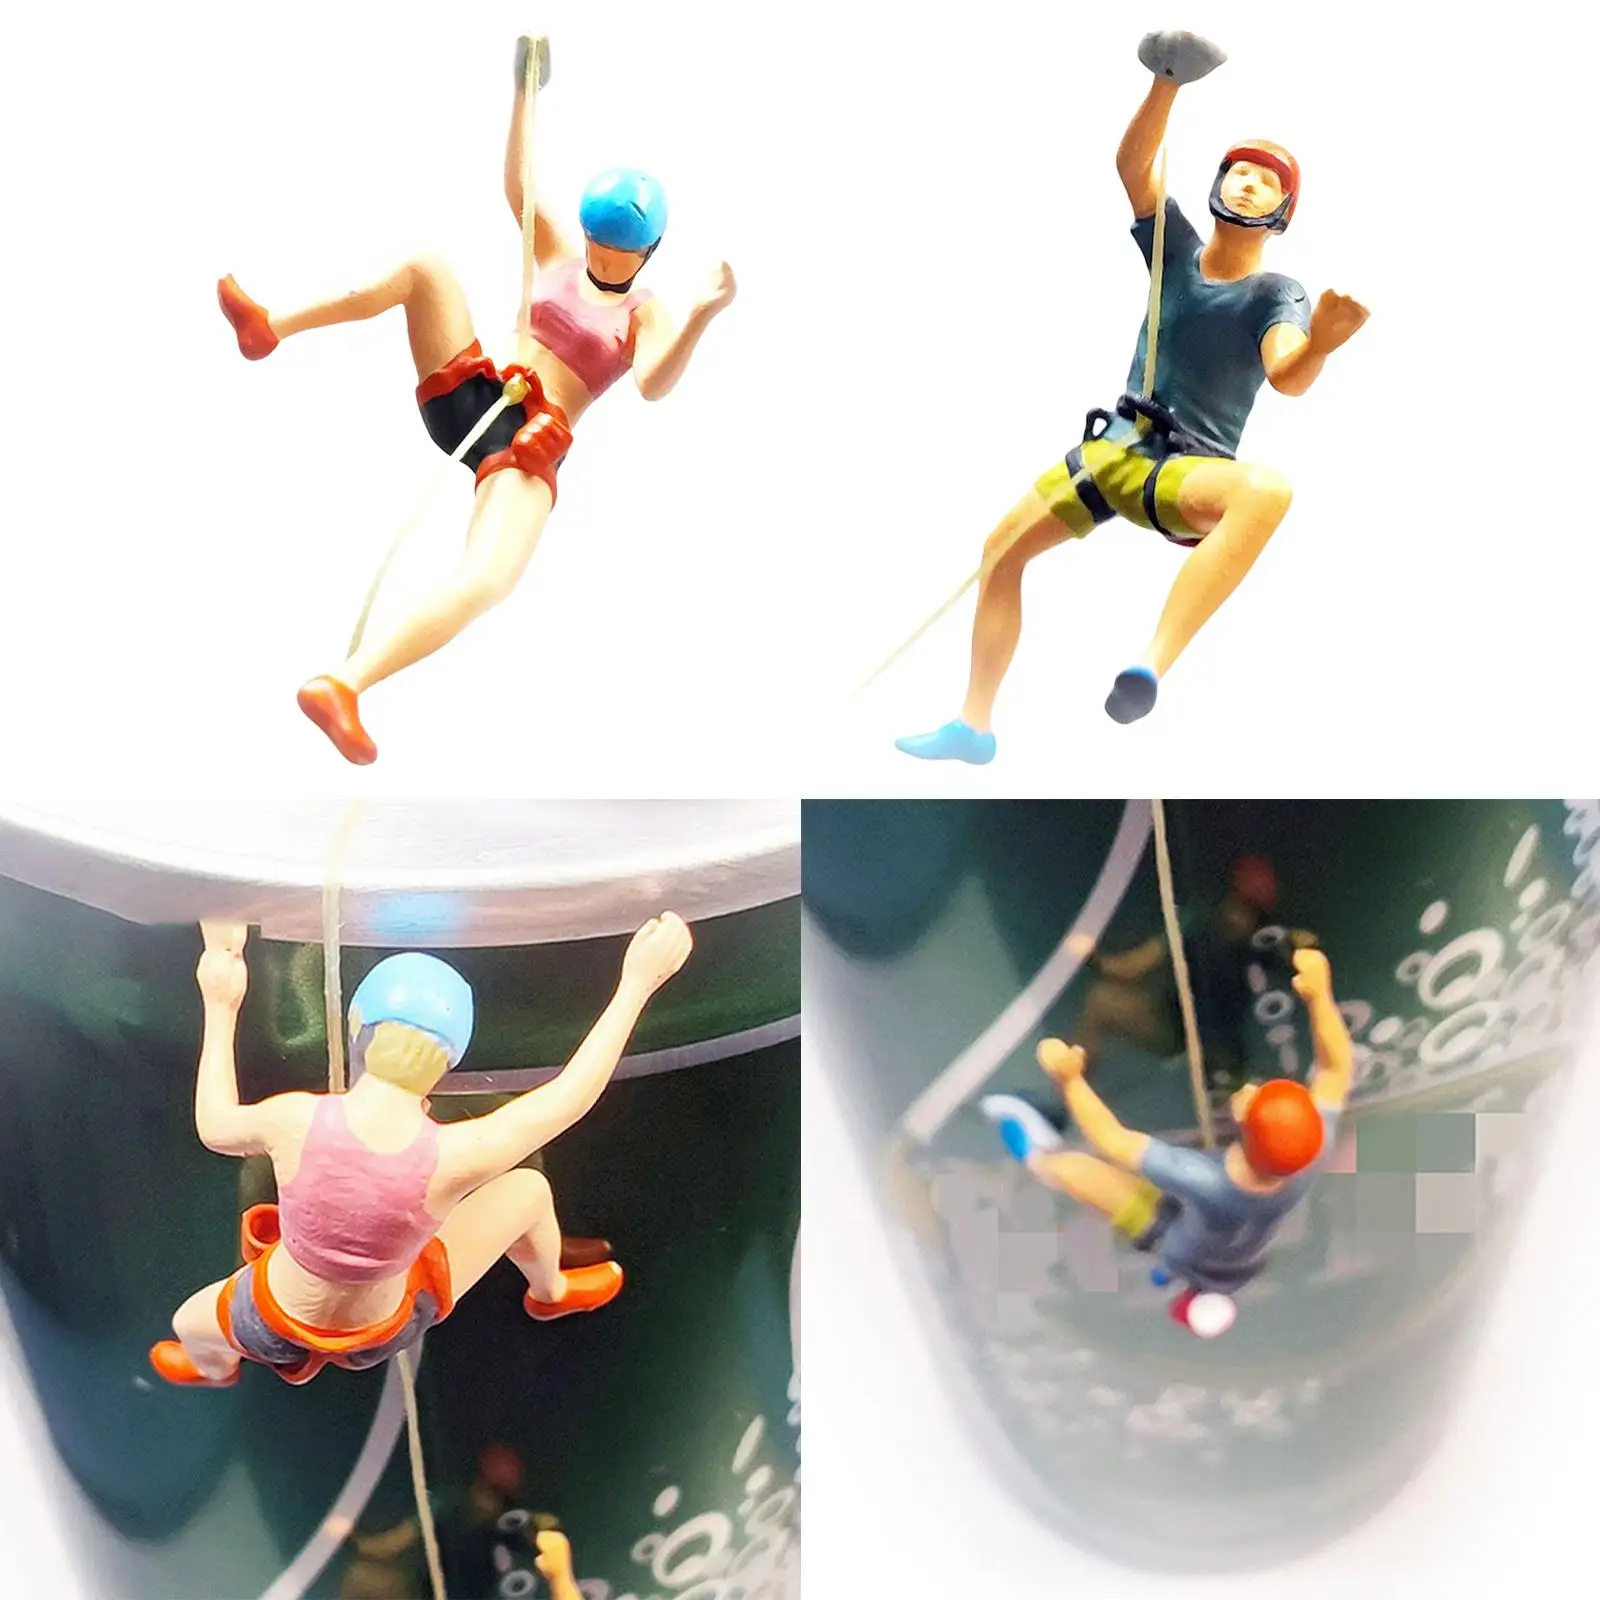 Assembling Climbing Figures, Character Model, Dollhouse People, Simulation